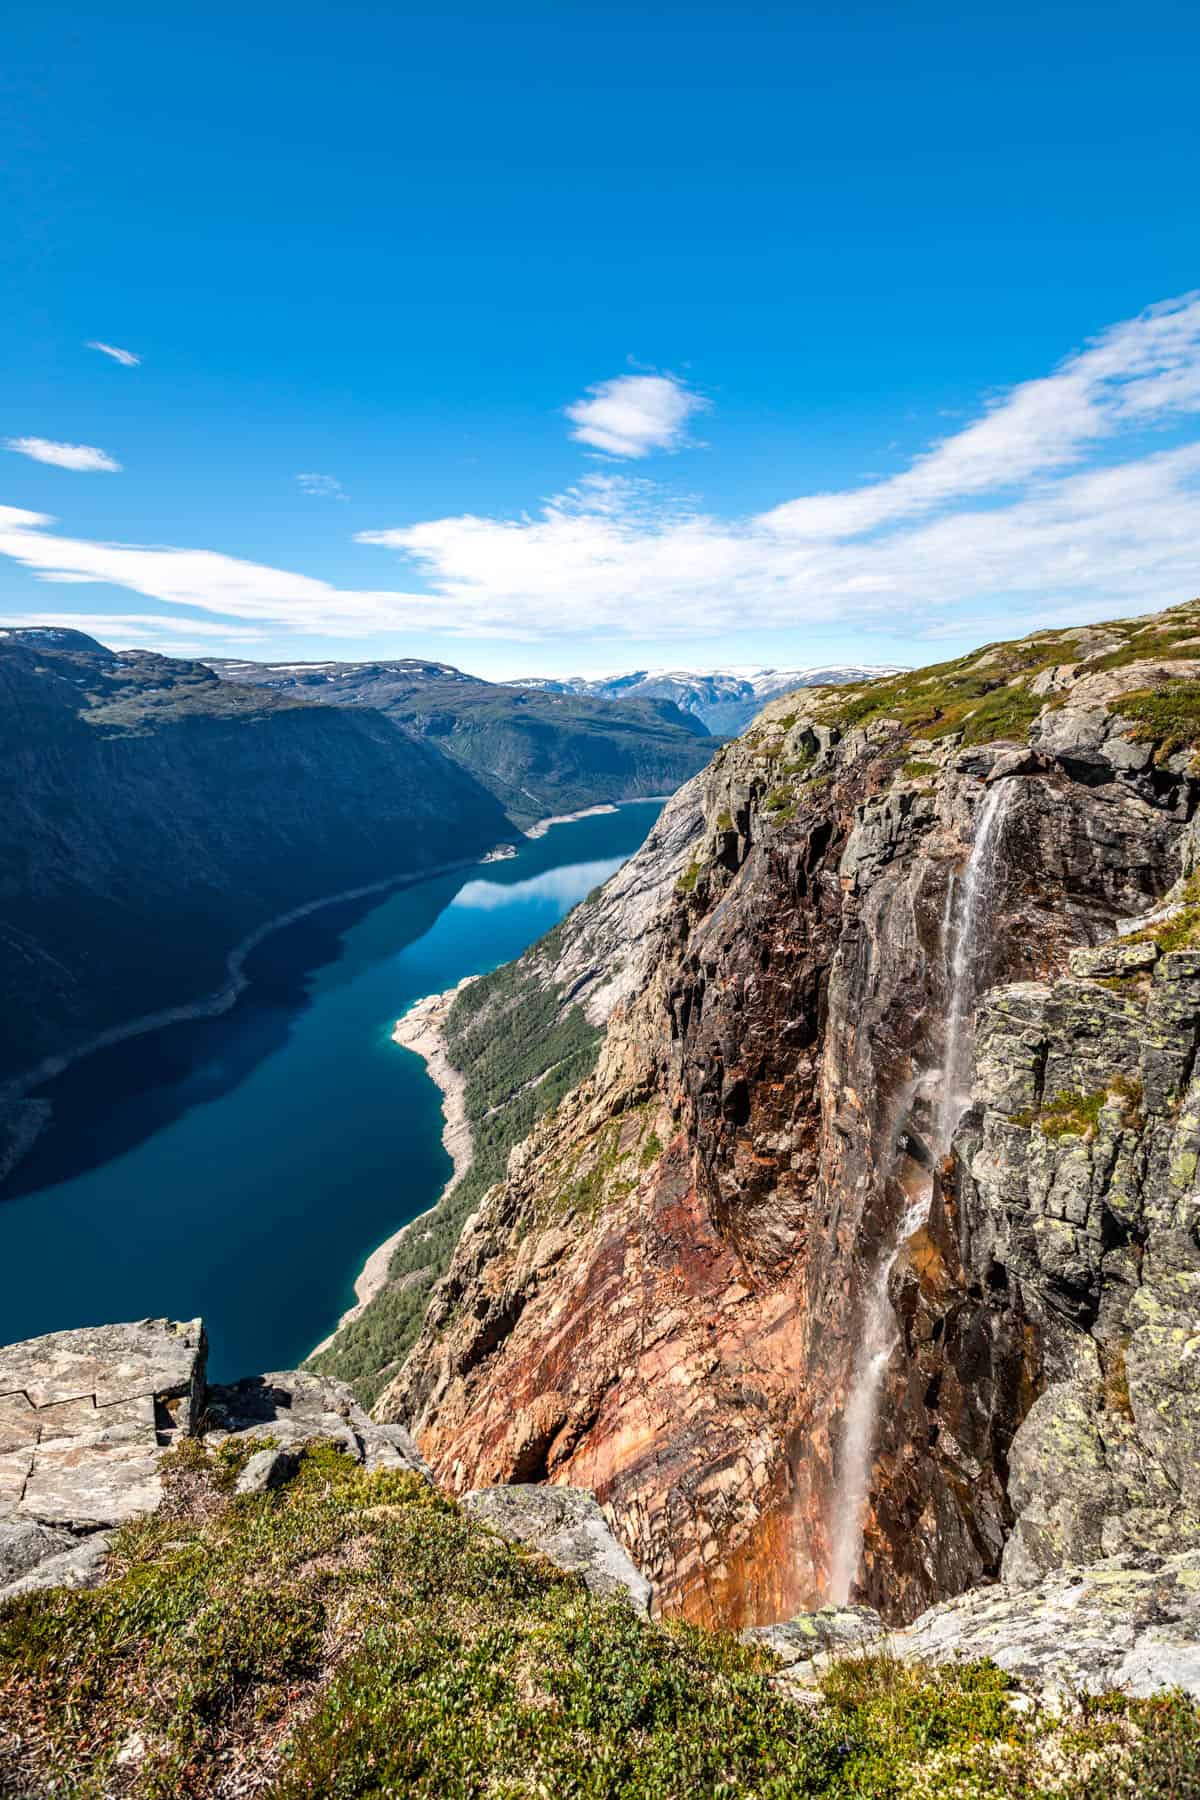 A waterfall pouring out of a steep hillside into the blue fjord below on a sunny day.